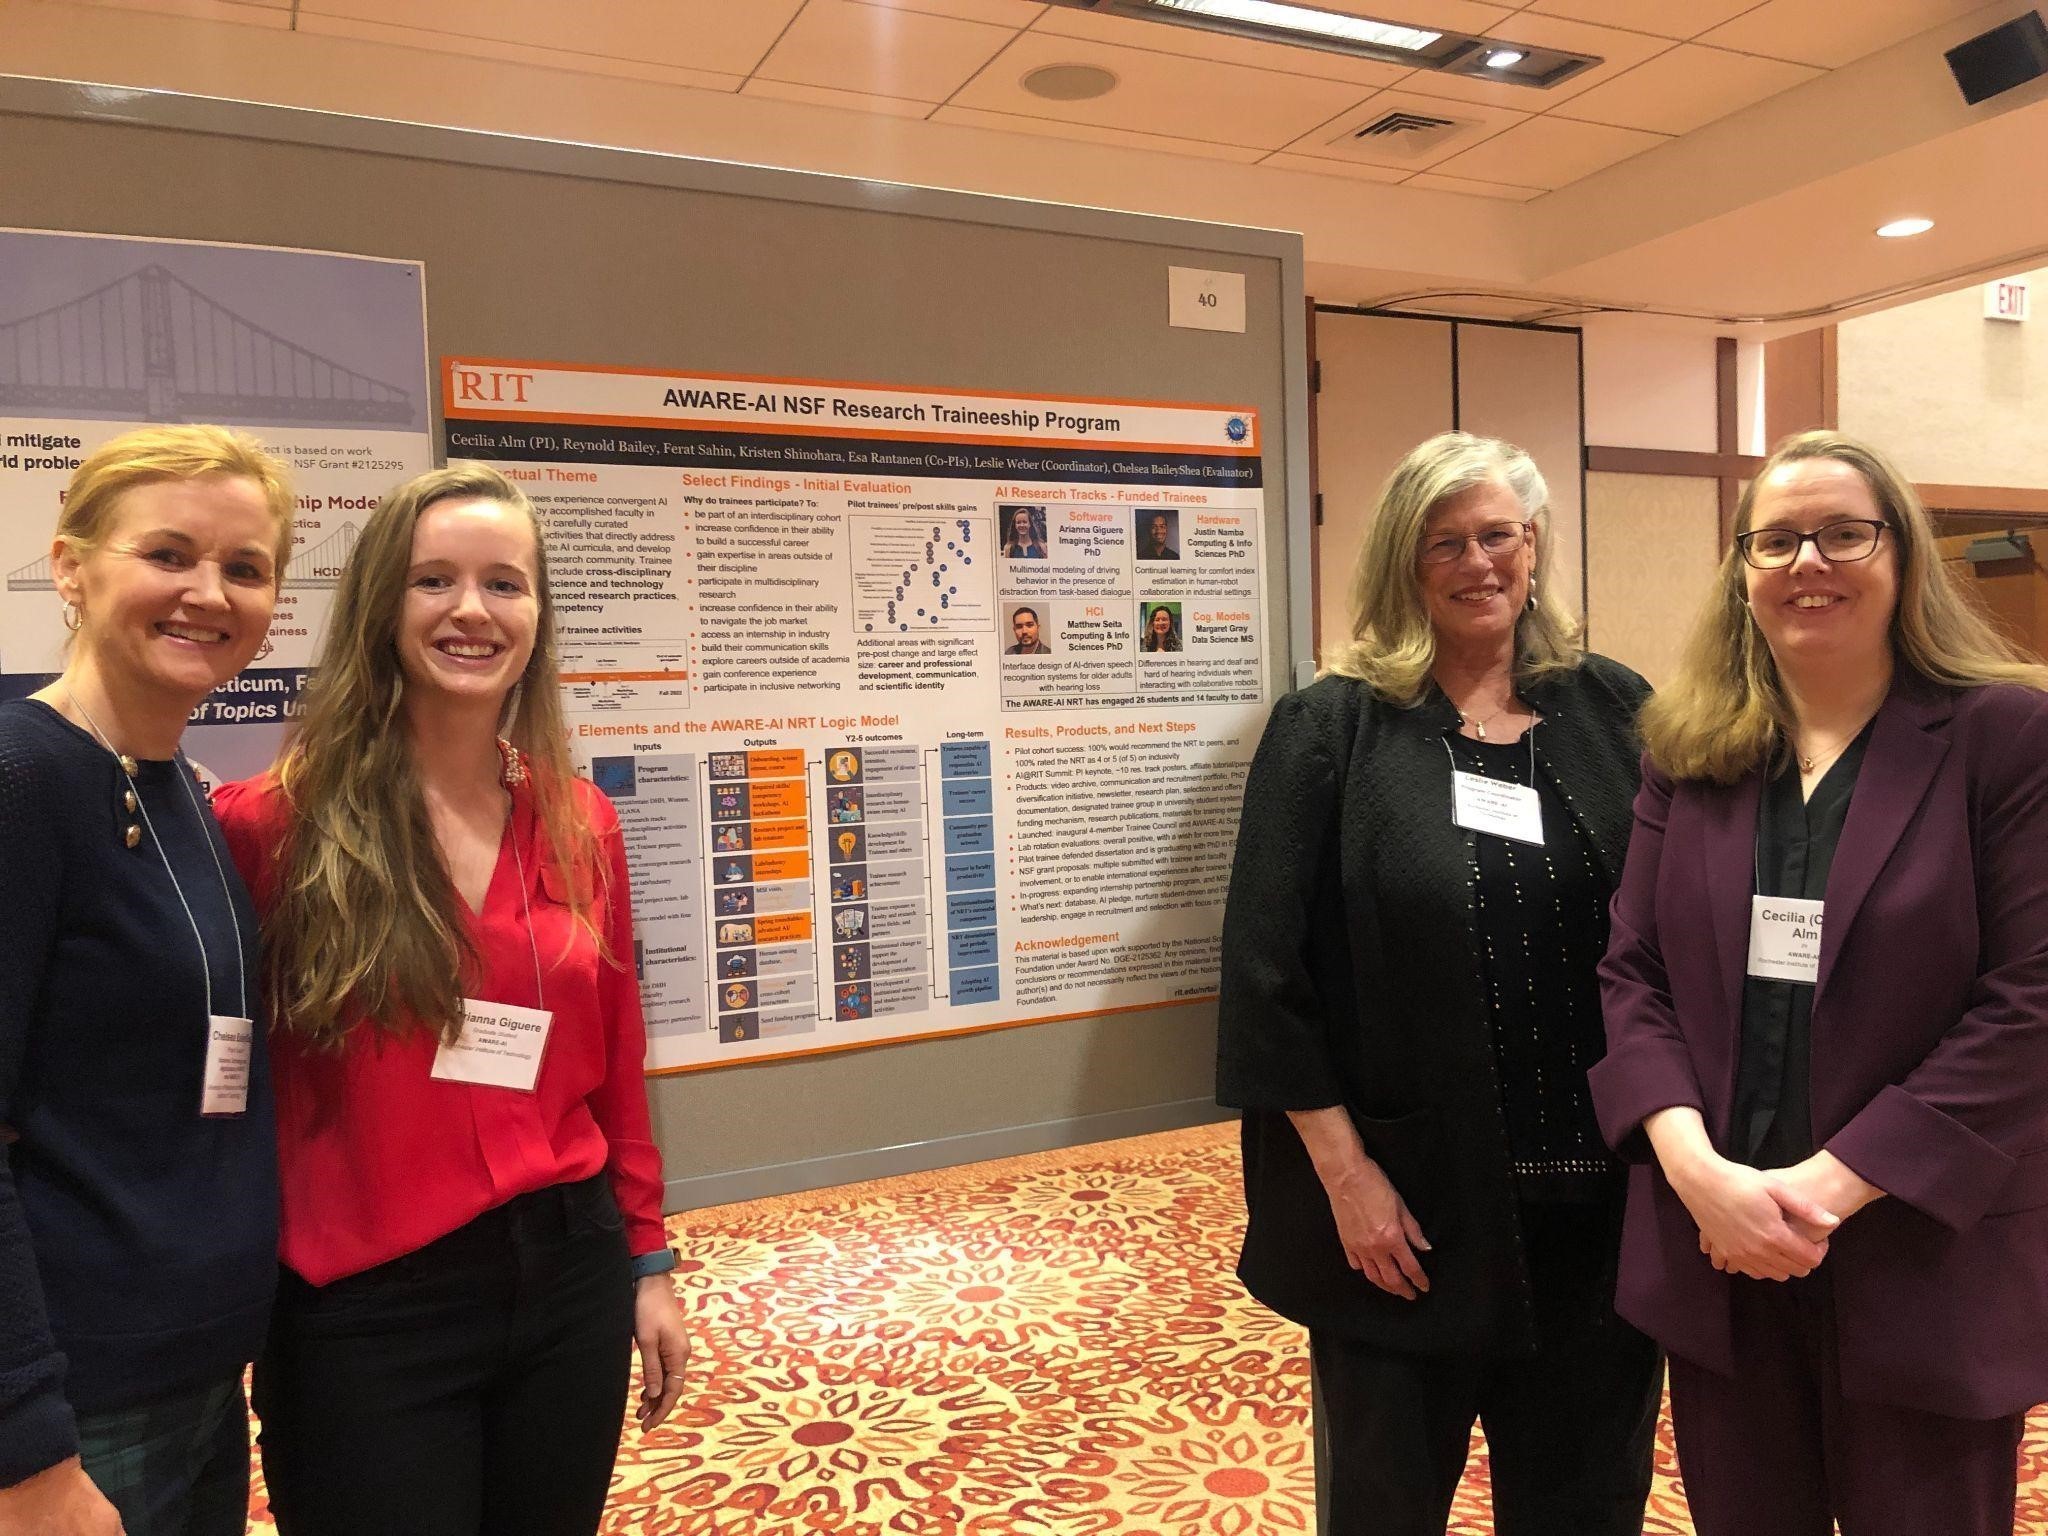 AWARE-AI at the NSF NRT annual meeting (from left to right): Chelsea BaileyShea, external evaluator; Arianna Giguere, trainee; Leslie Weber, project coordinator; Cecilia Alm, director.